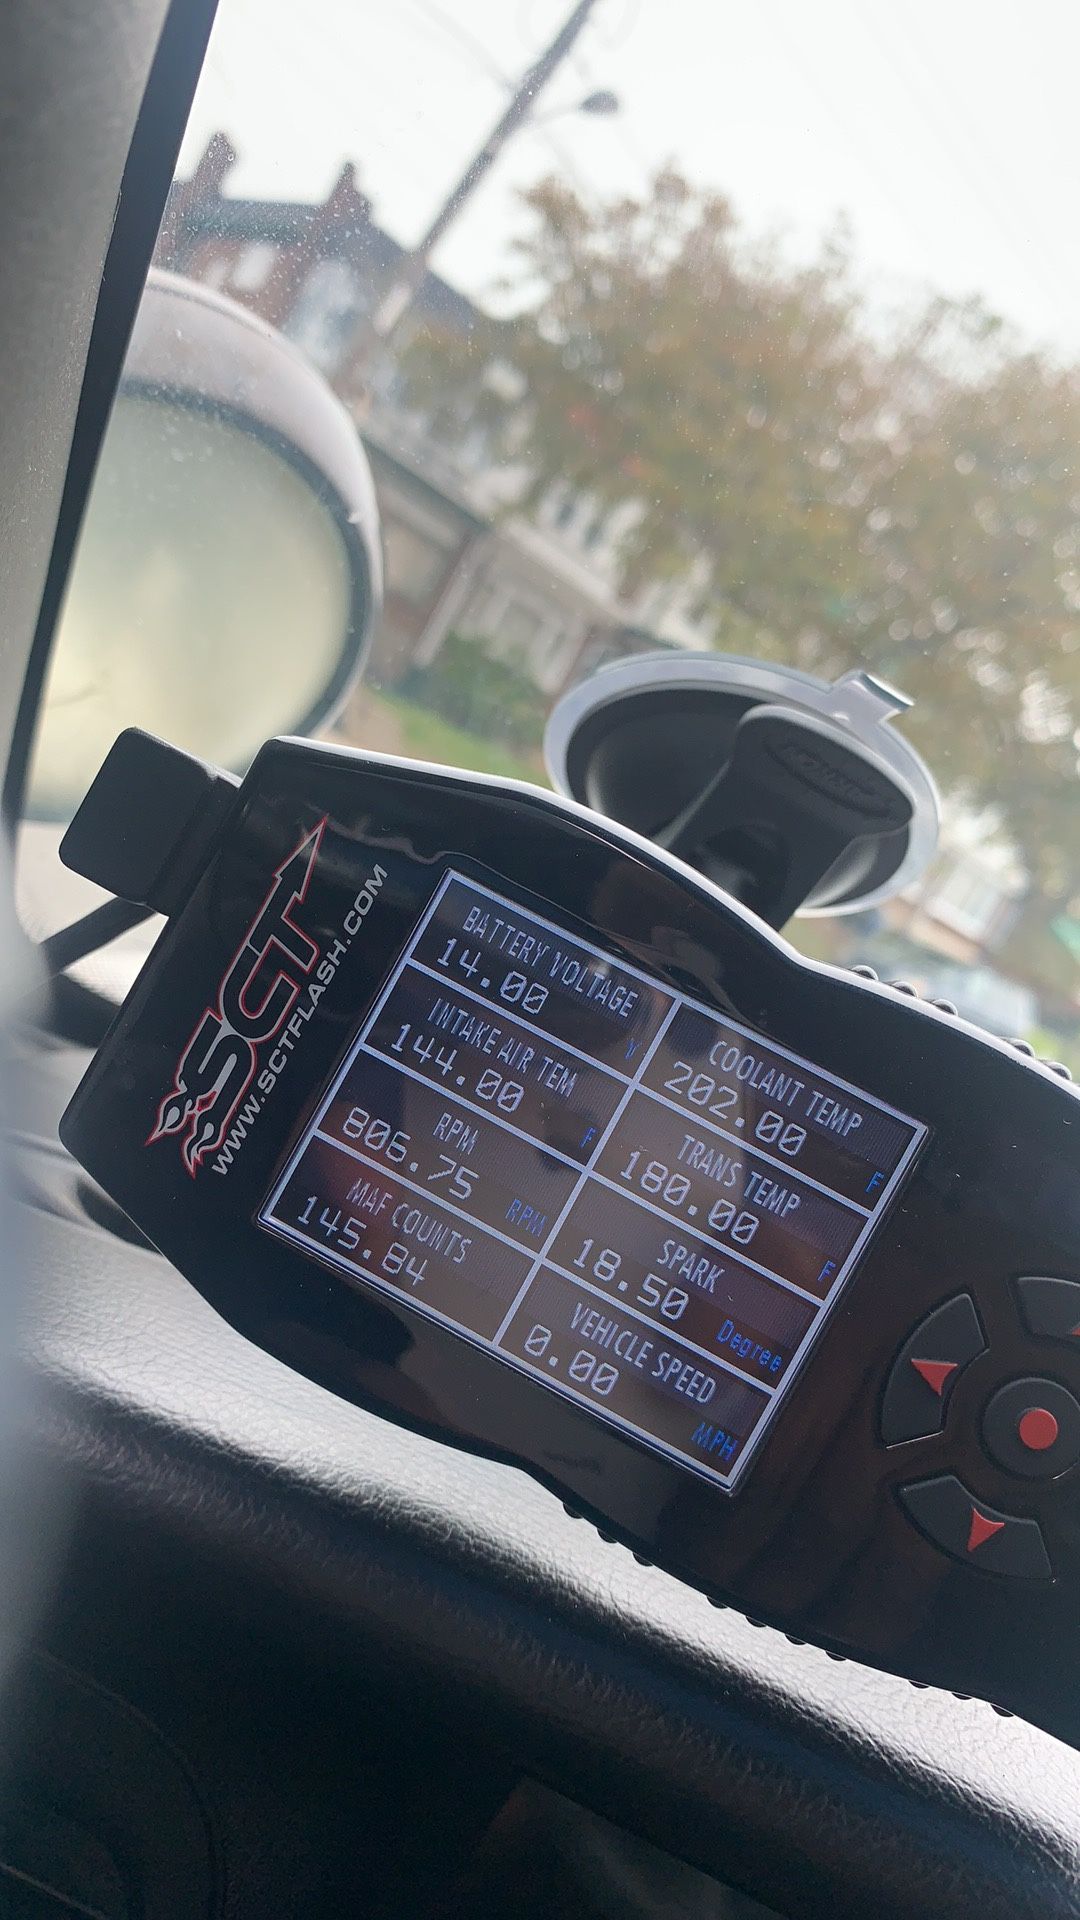 Sct Tuner Adds Extra Horsepower And Code Reader Also Monitors Cars Temperature 